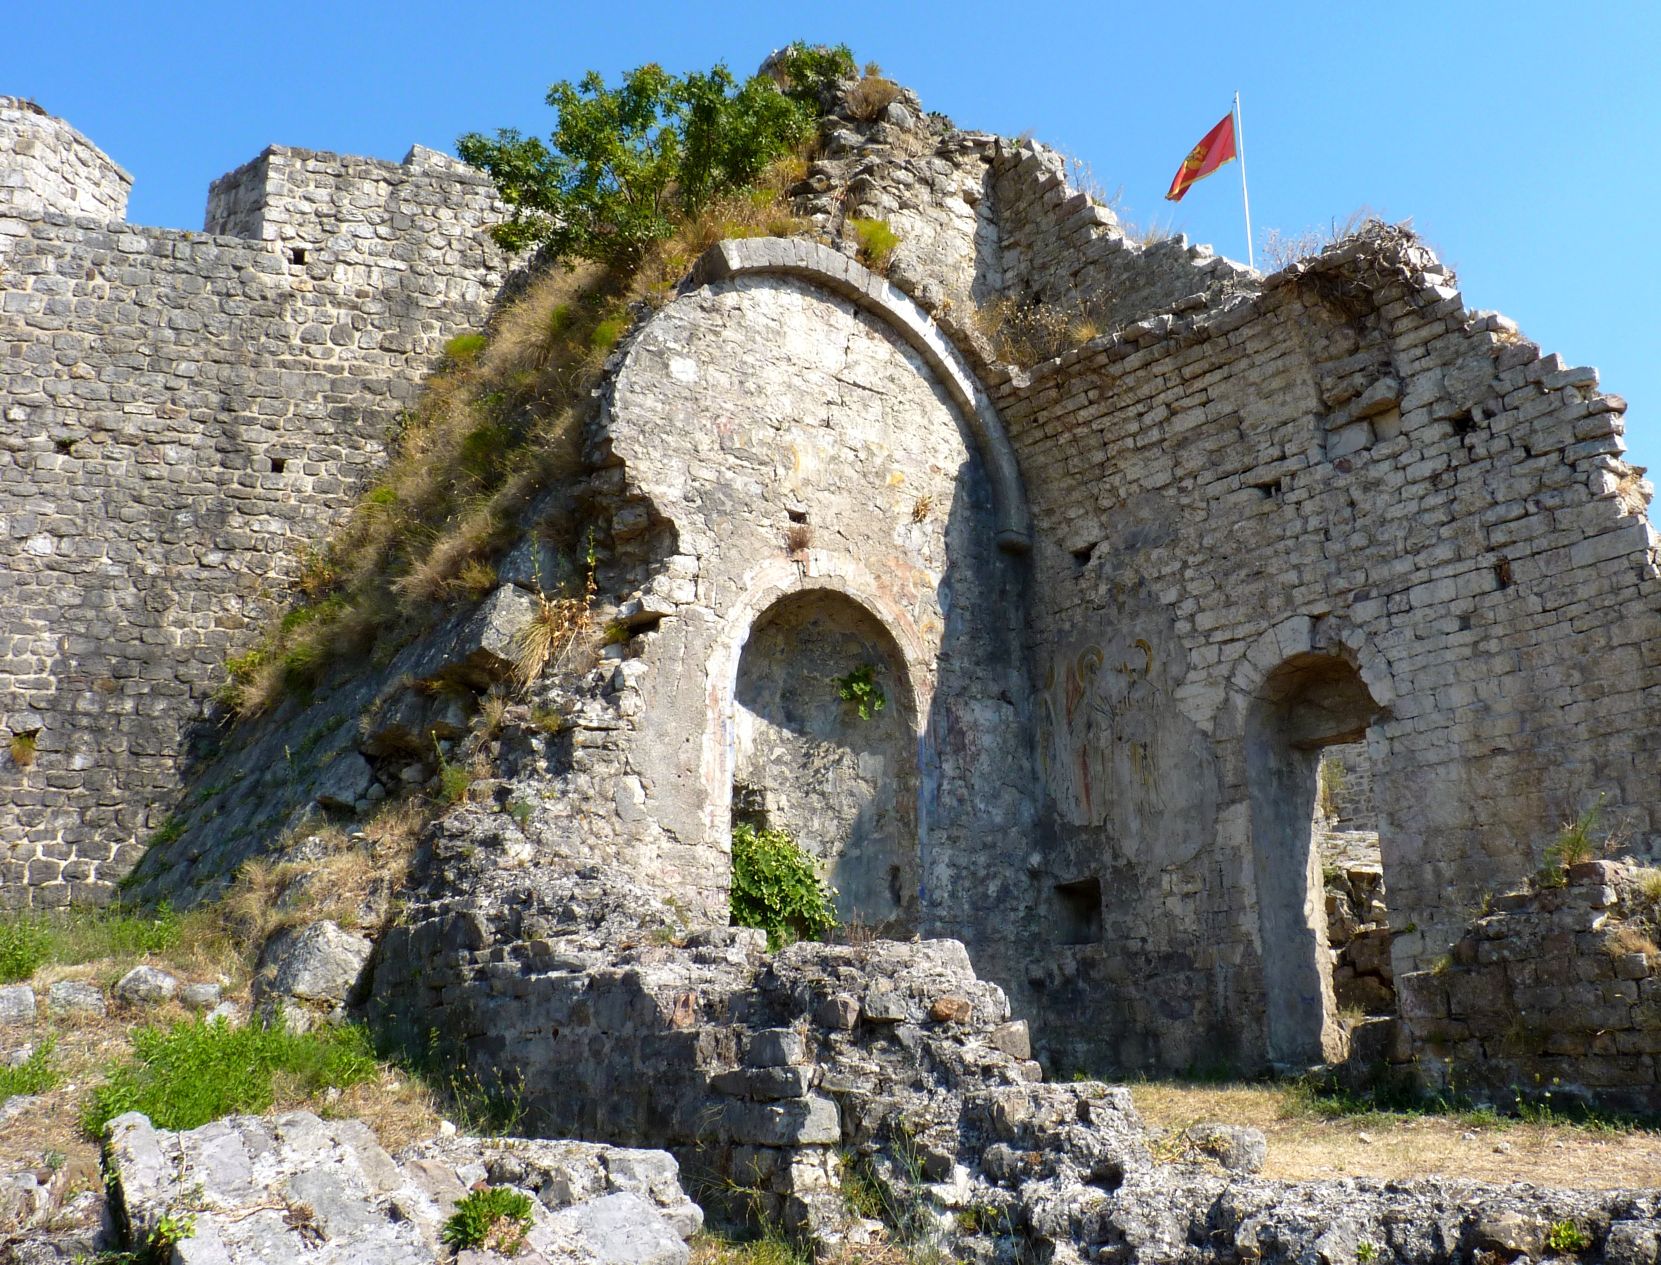 Ruins_with_flag_in_Stari_Bar